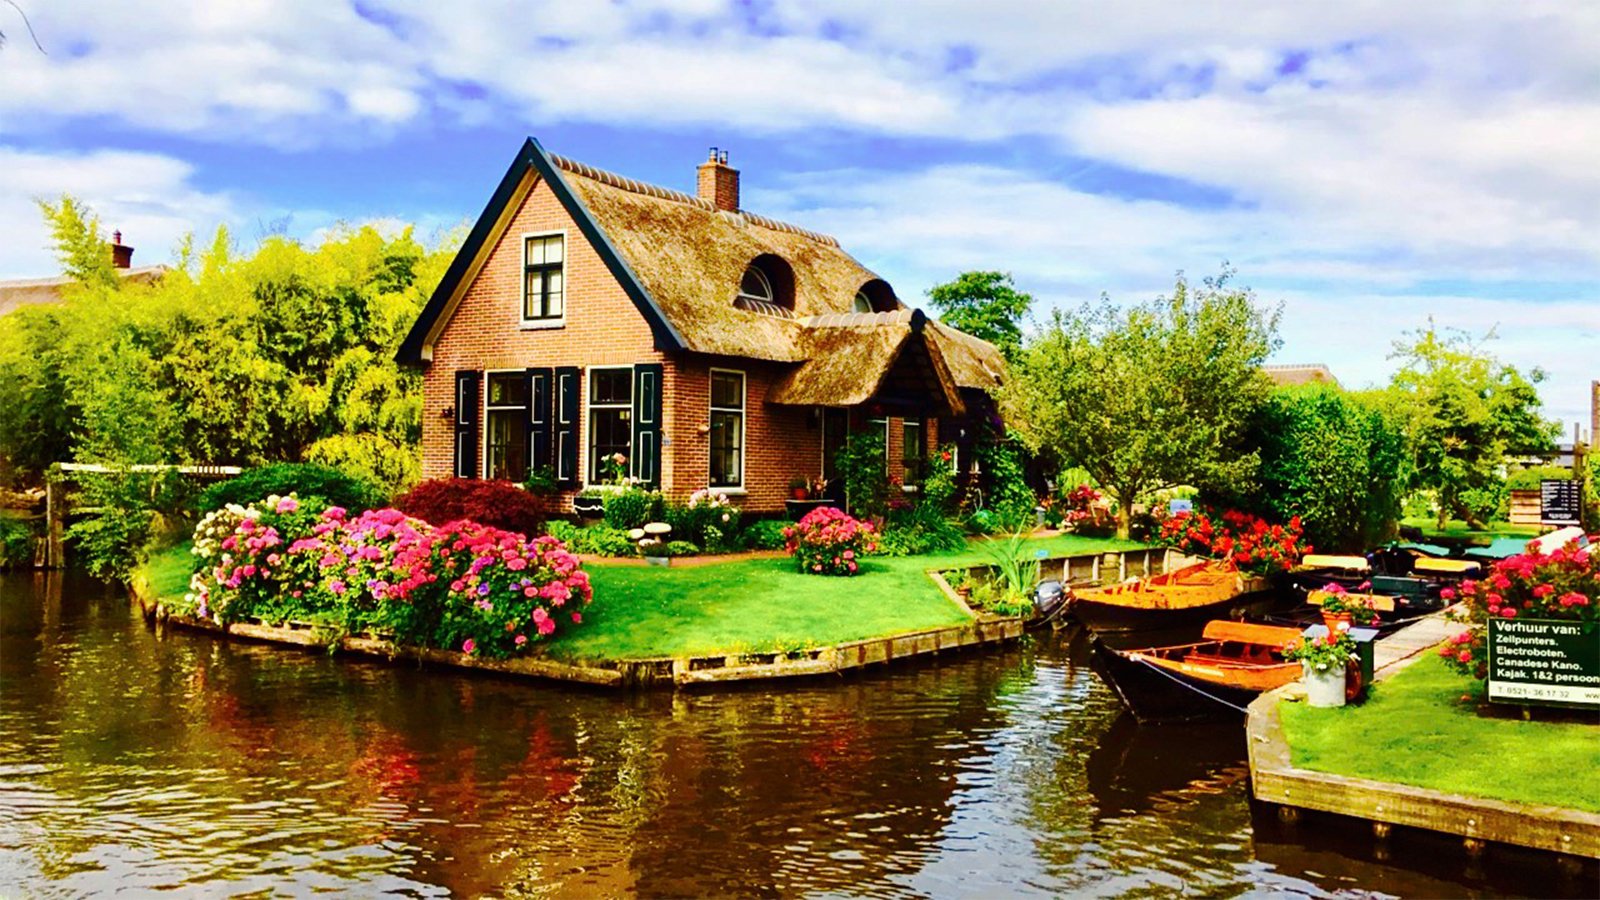 Giethoorn magical village with mystical feel in Holland